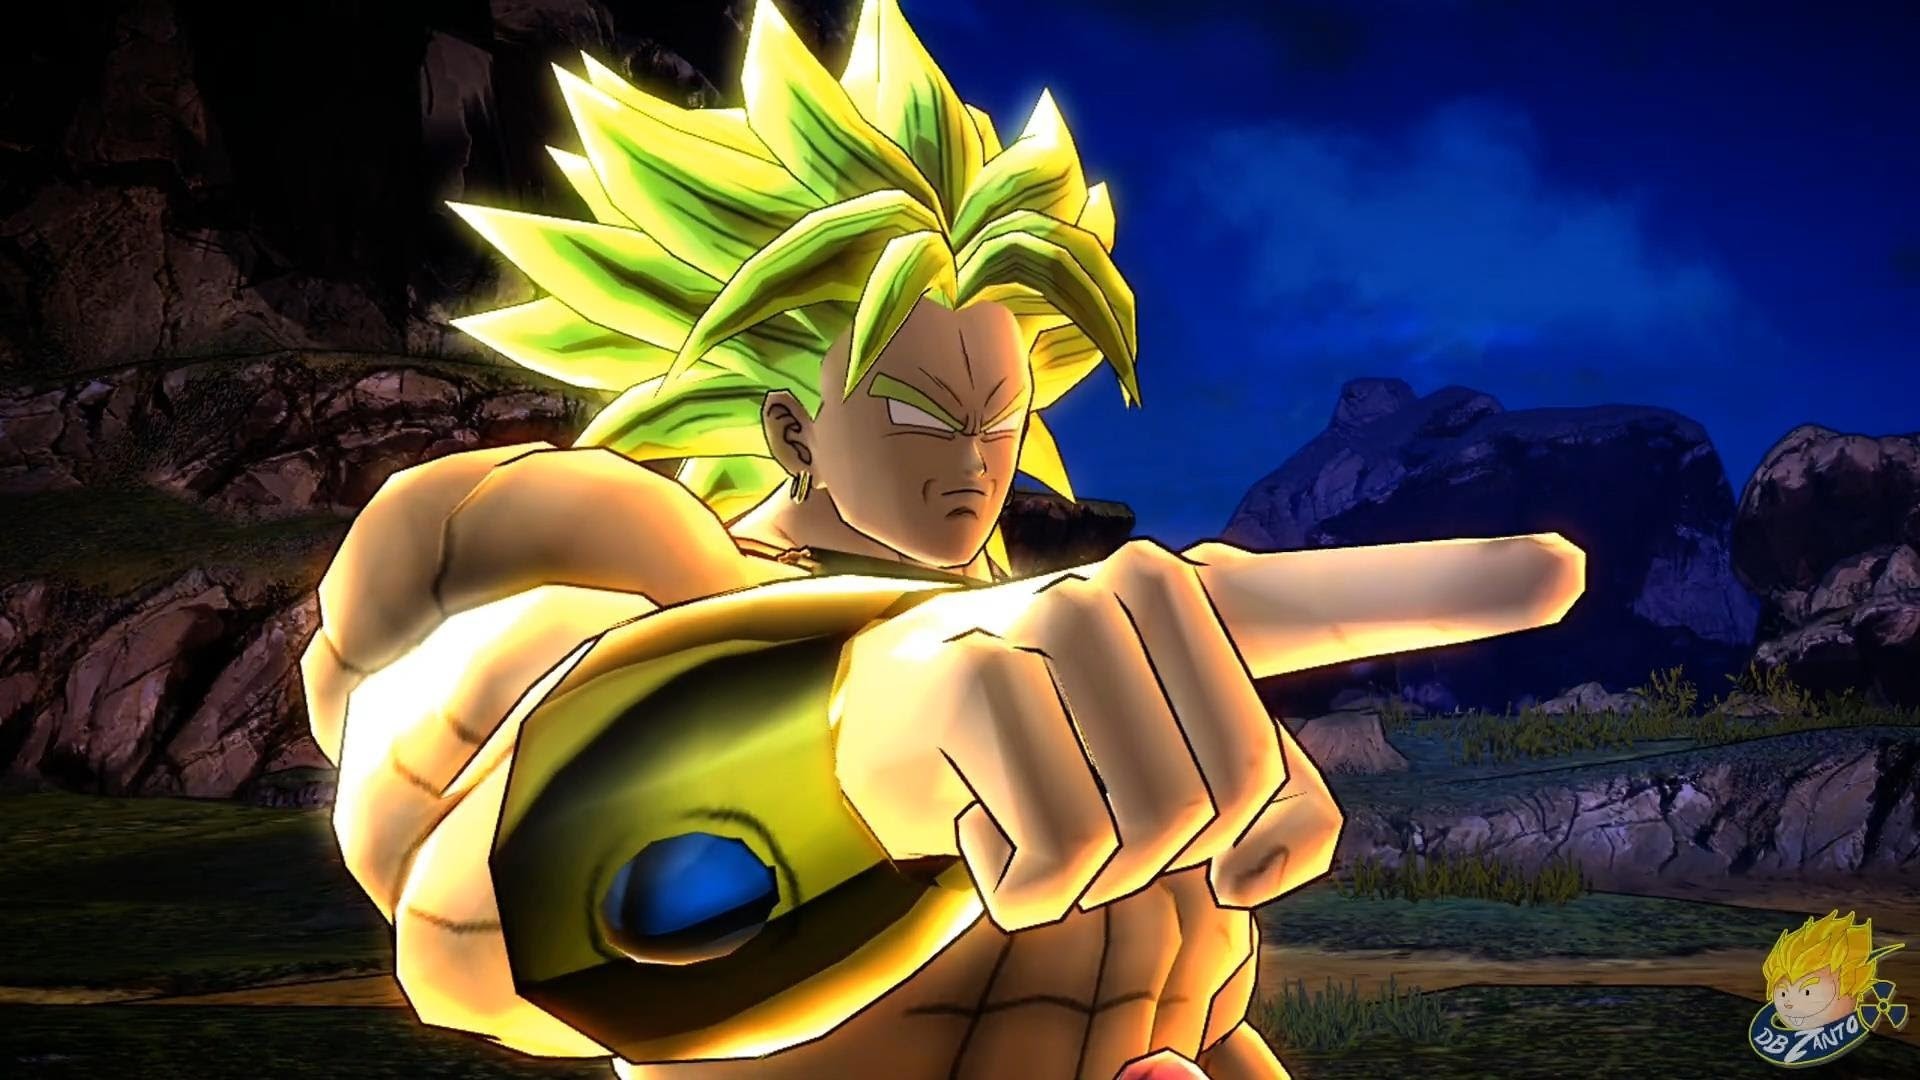 1920x1080 20 Best Broly Images On Dragonball Z Goku And Dbz Gt.